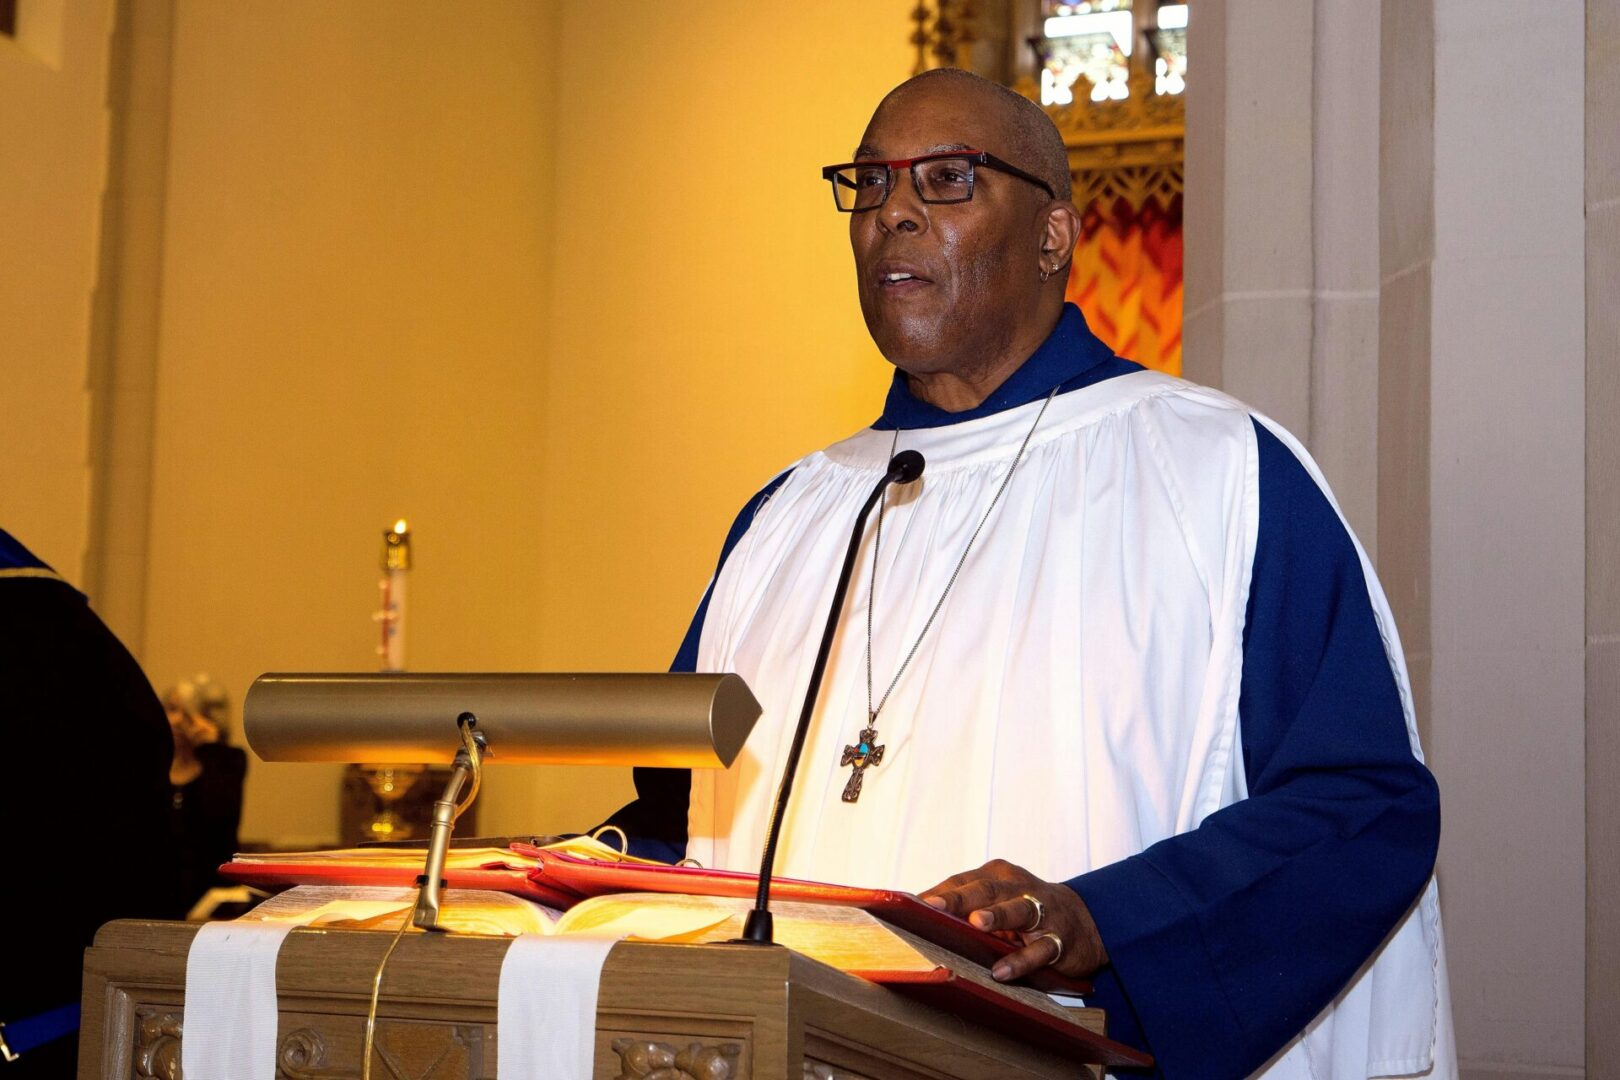 Black man with cross necklace preaching from a pulpit